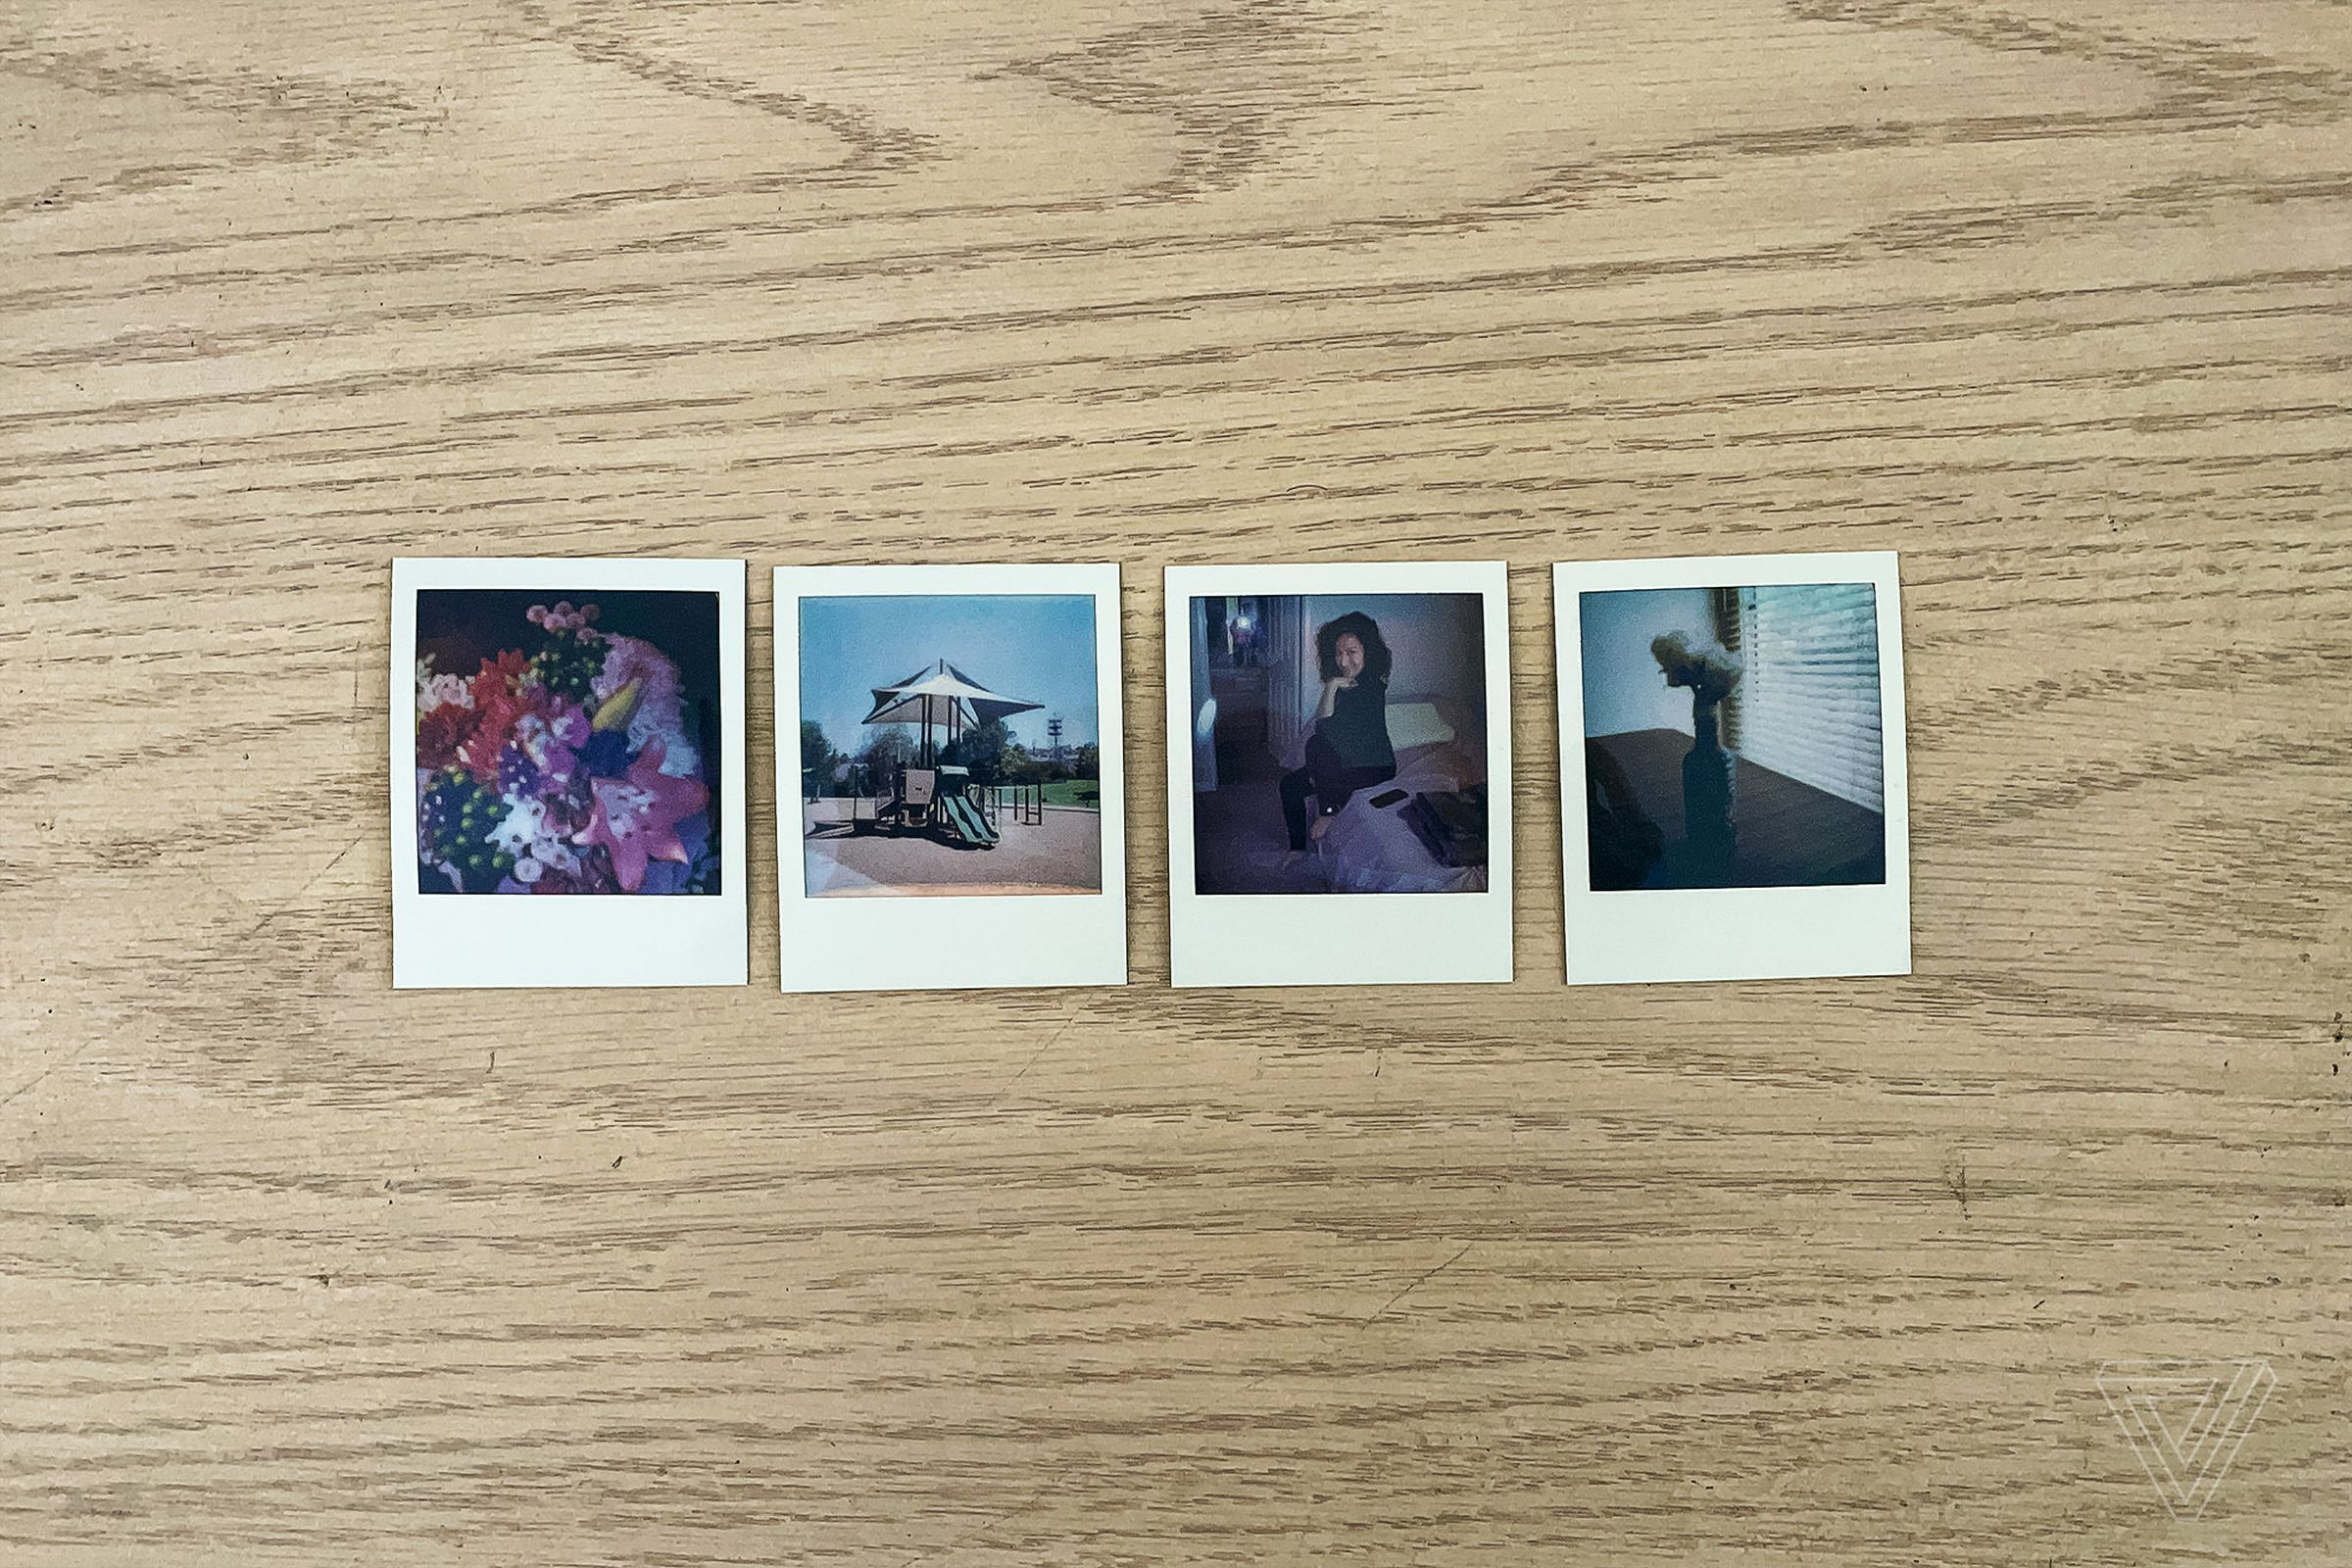 The Polaroid Go produced tiny, slightly clearer photos than the Polaroid Now Plus, although still struggled to capture low-light environments.